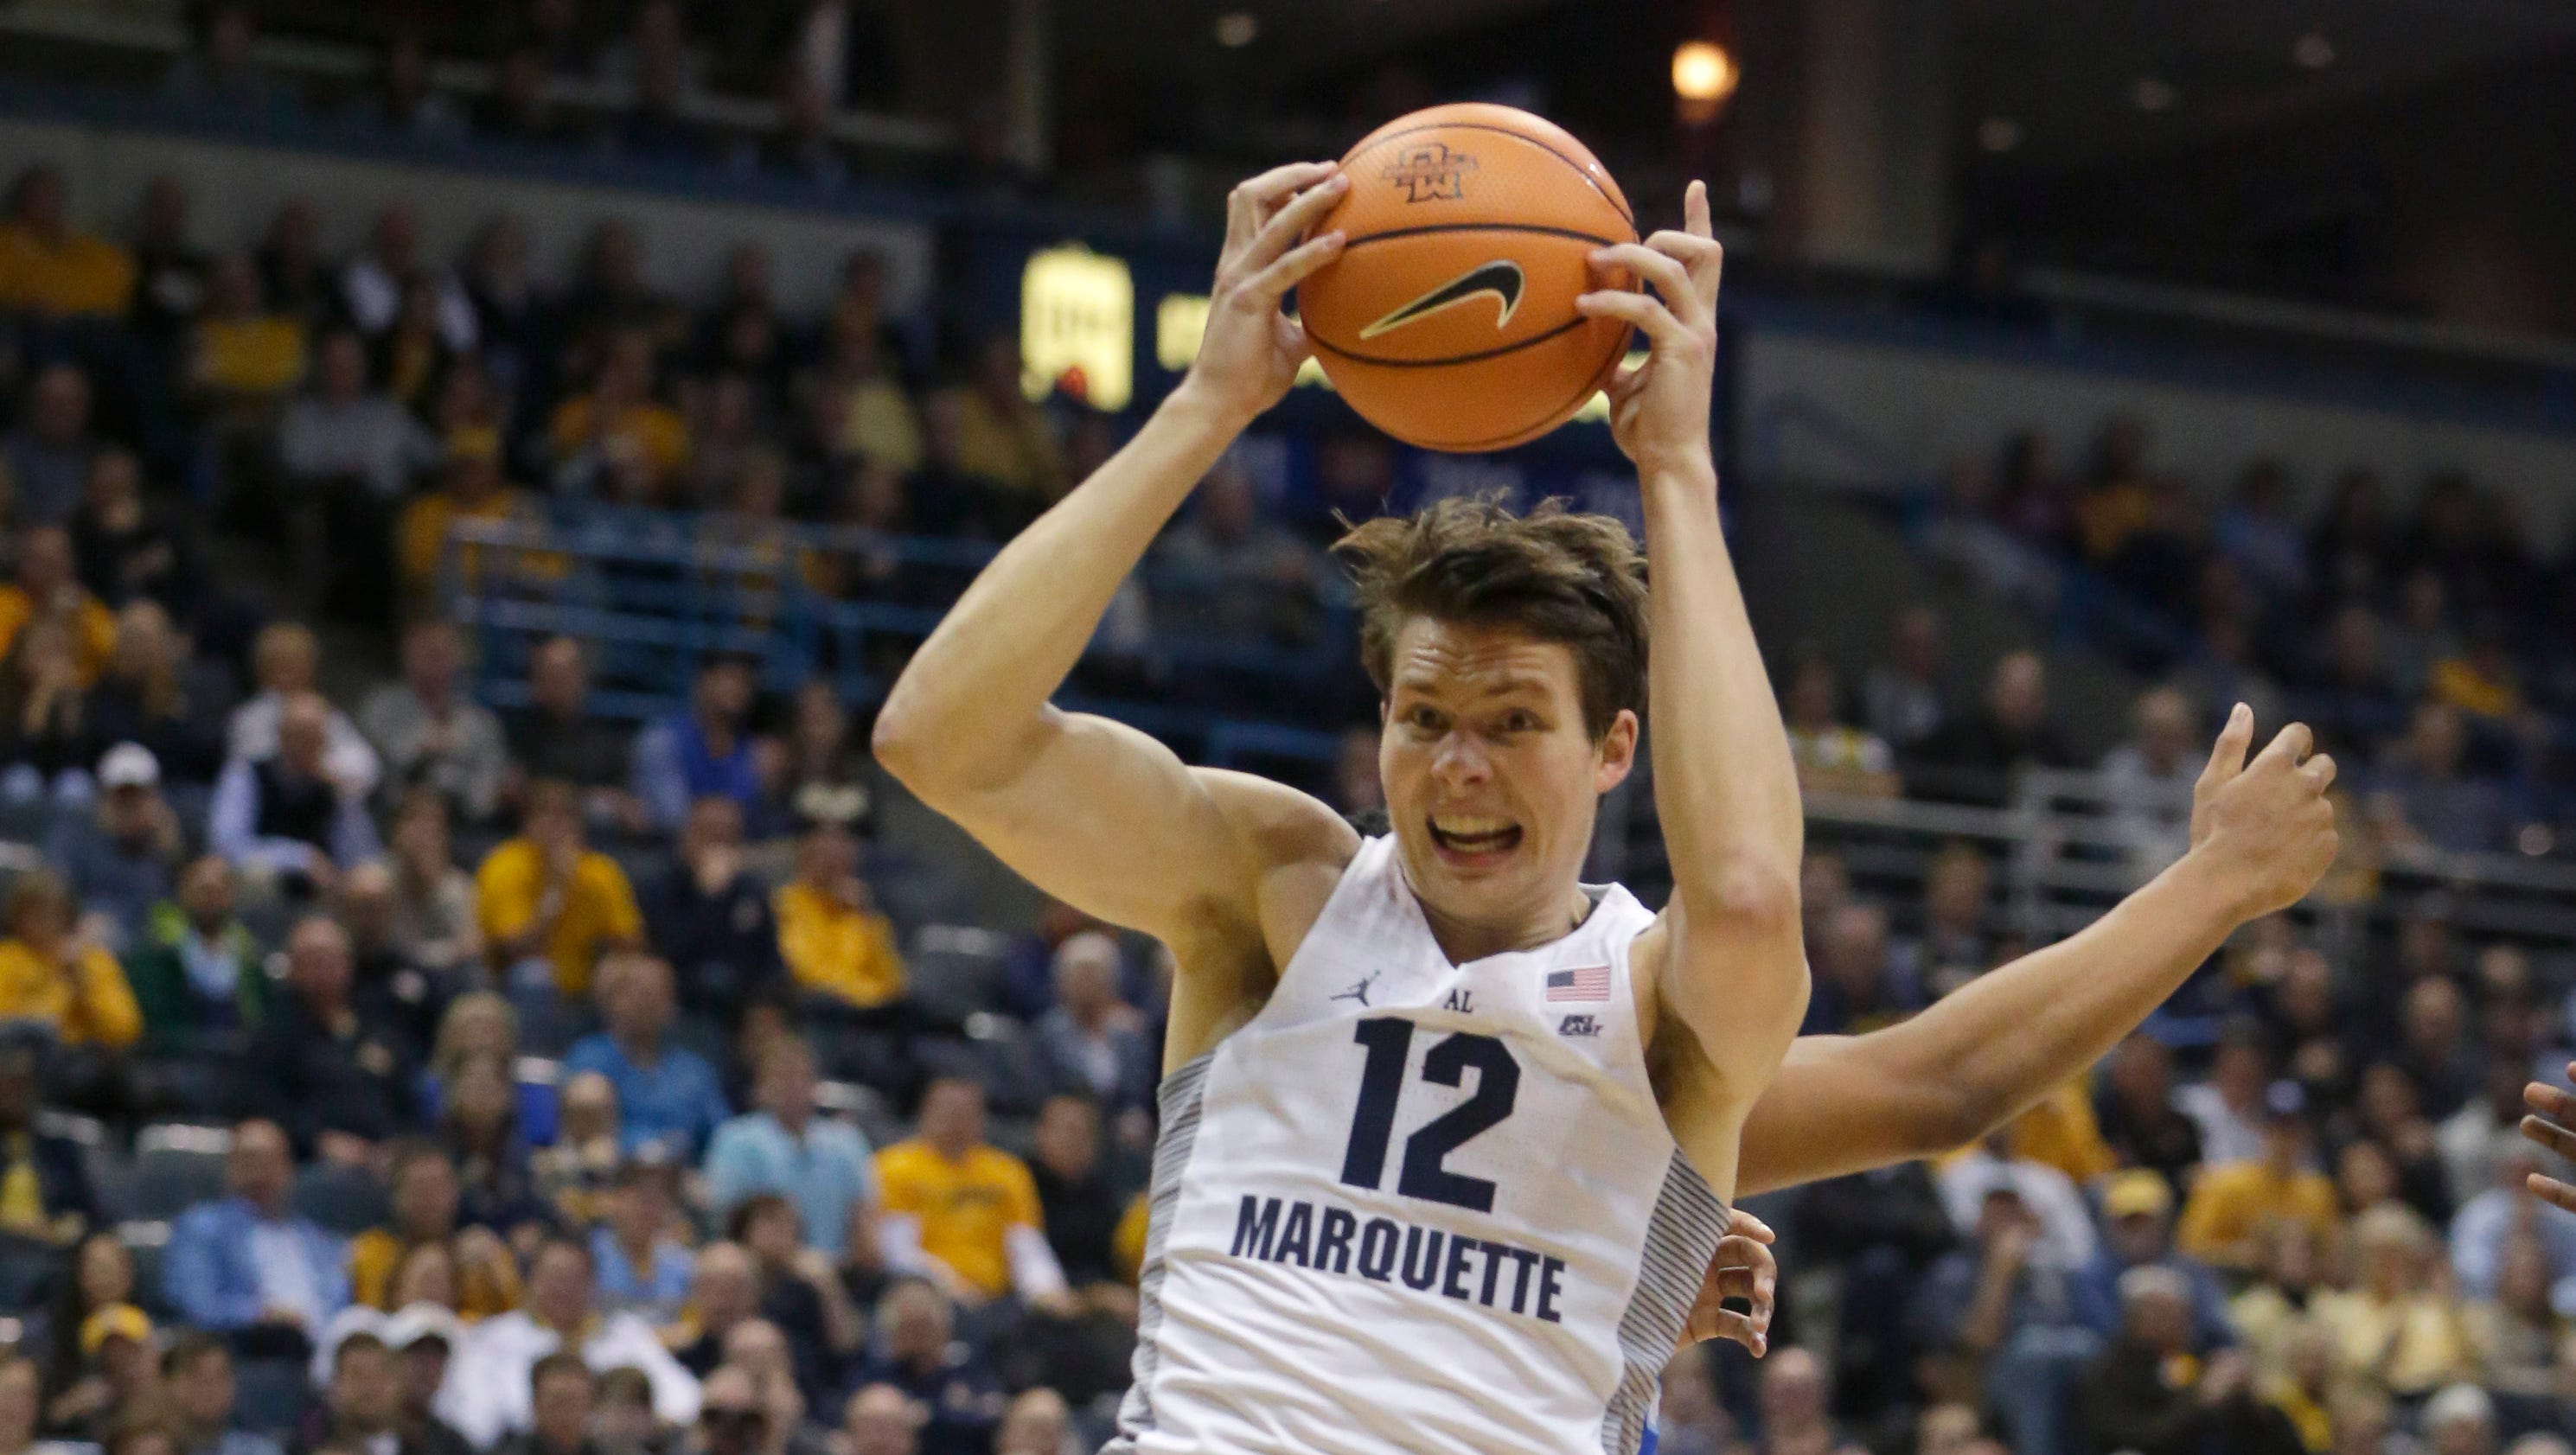 Marquette 84, Seton Hall 64: Rowsey warms up to home cookin